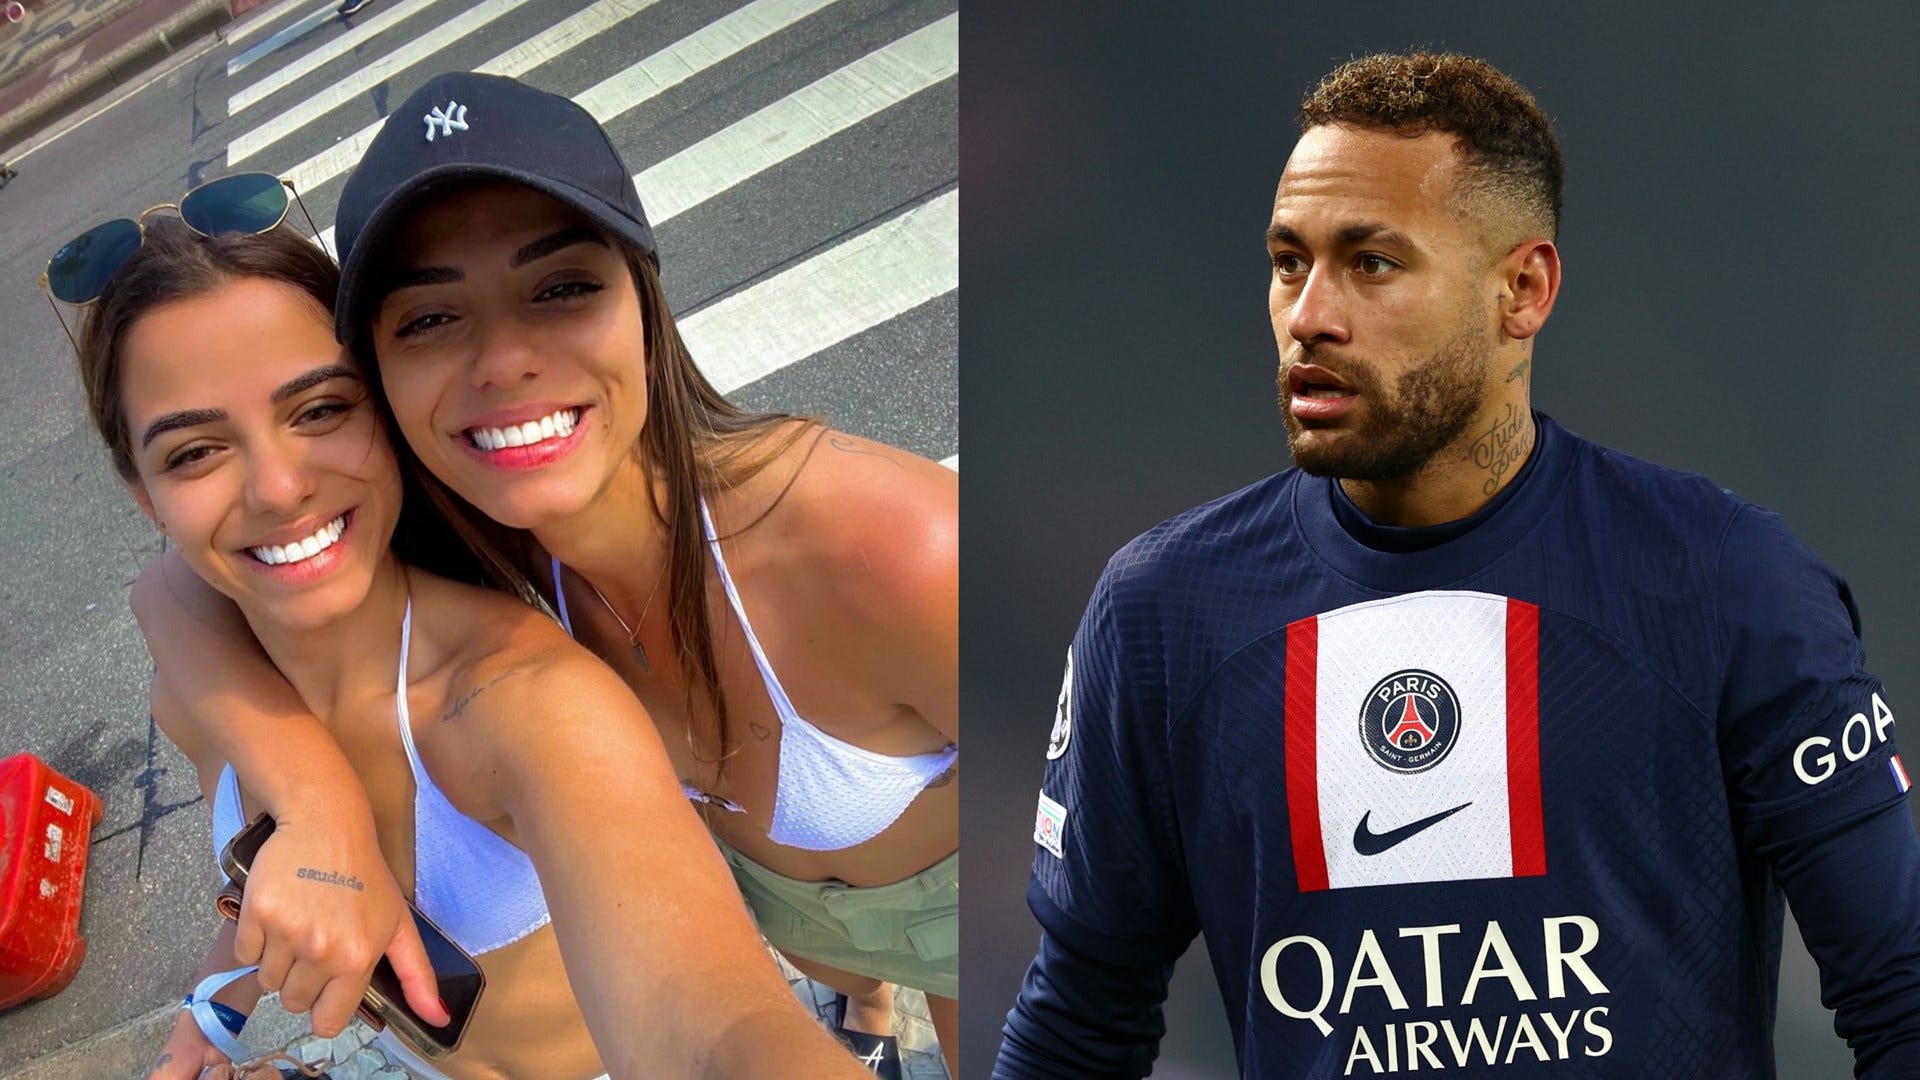 Neymar asked for sex with both of photo